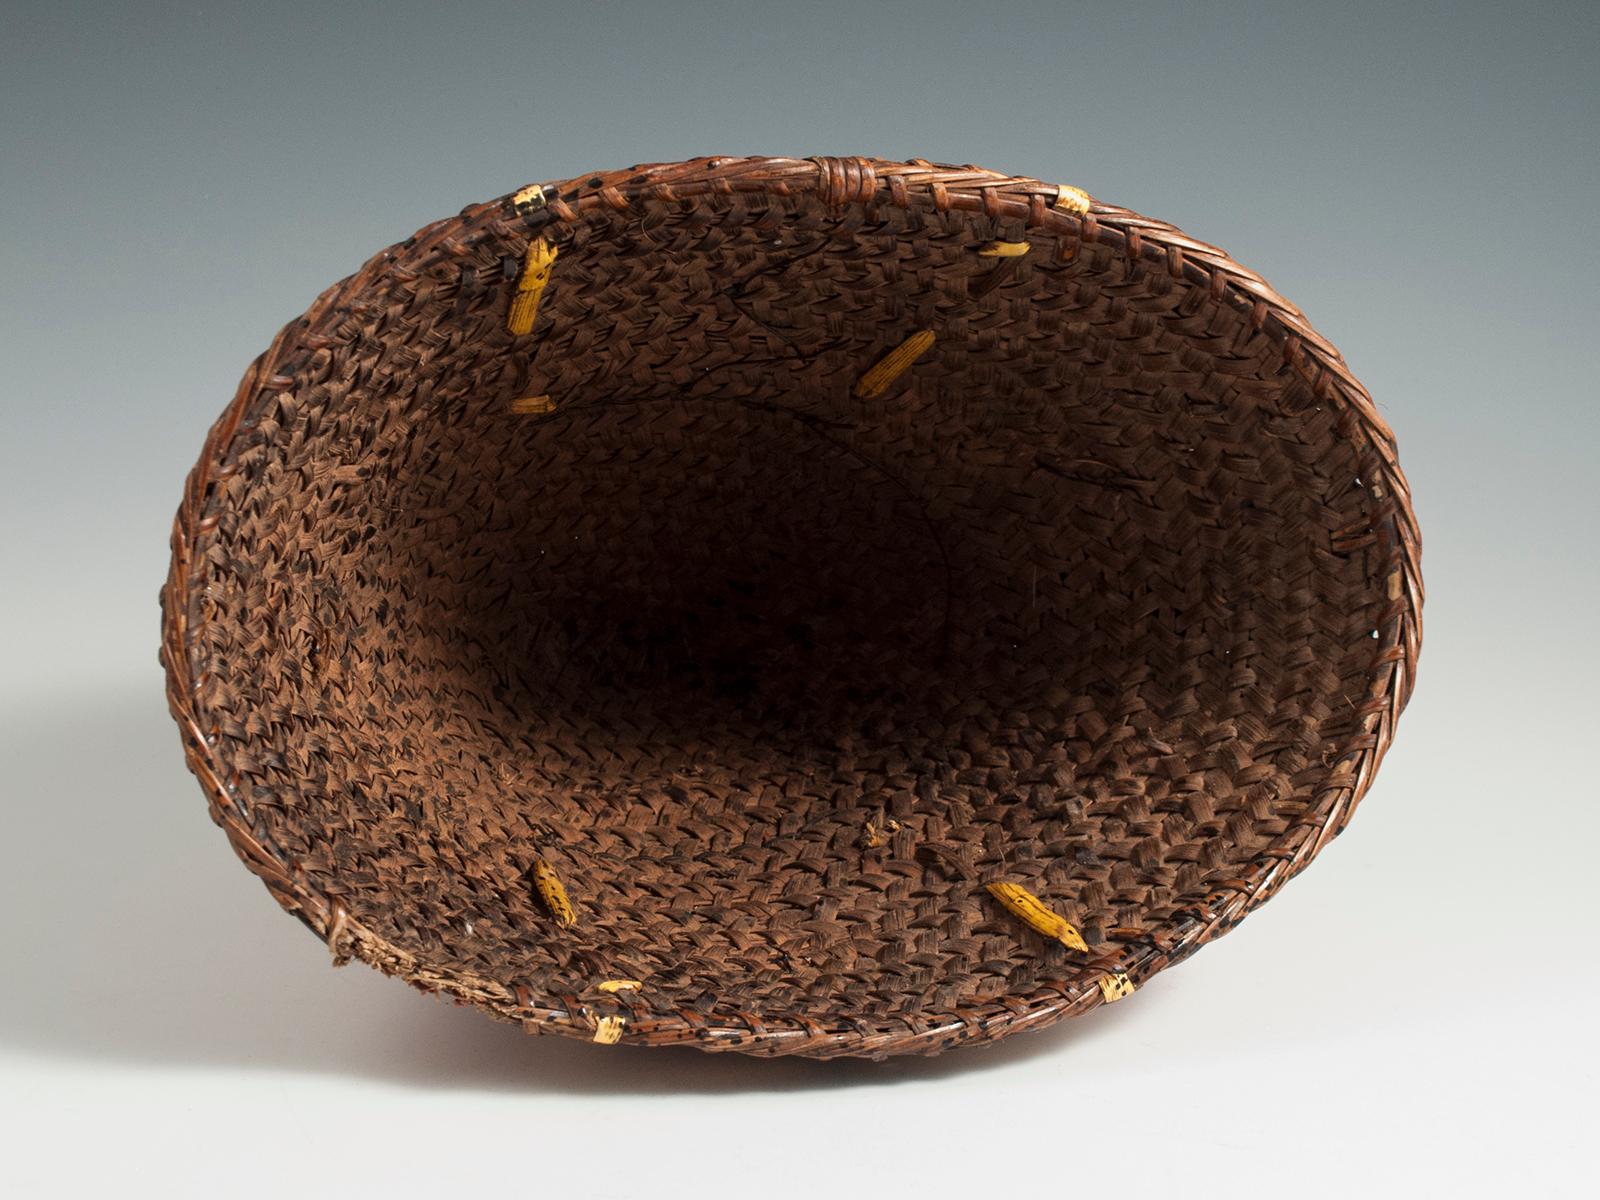 Cane Early to Mid-20th Century Tribal Hat, Naga People, Northeastern India